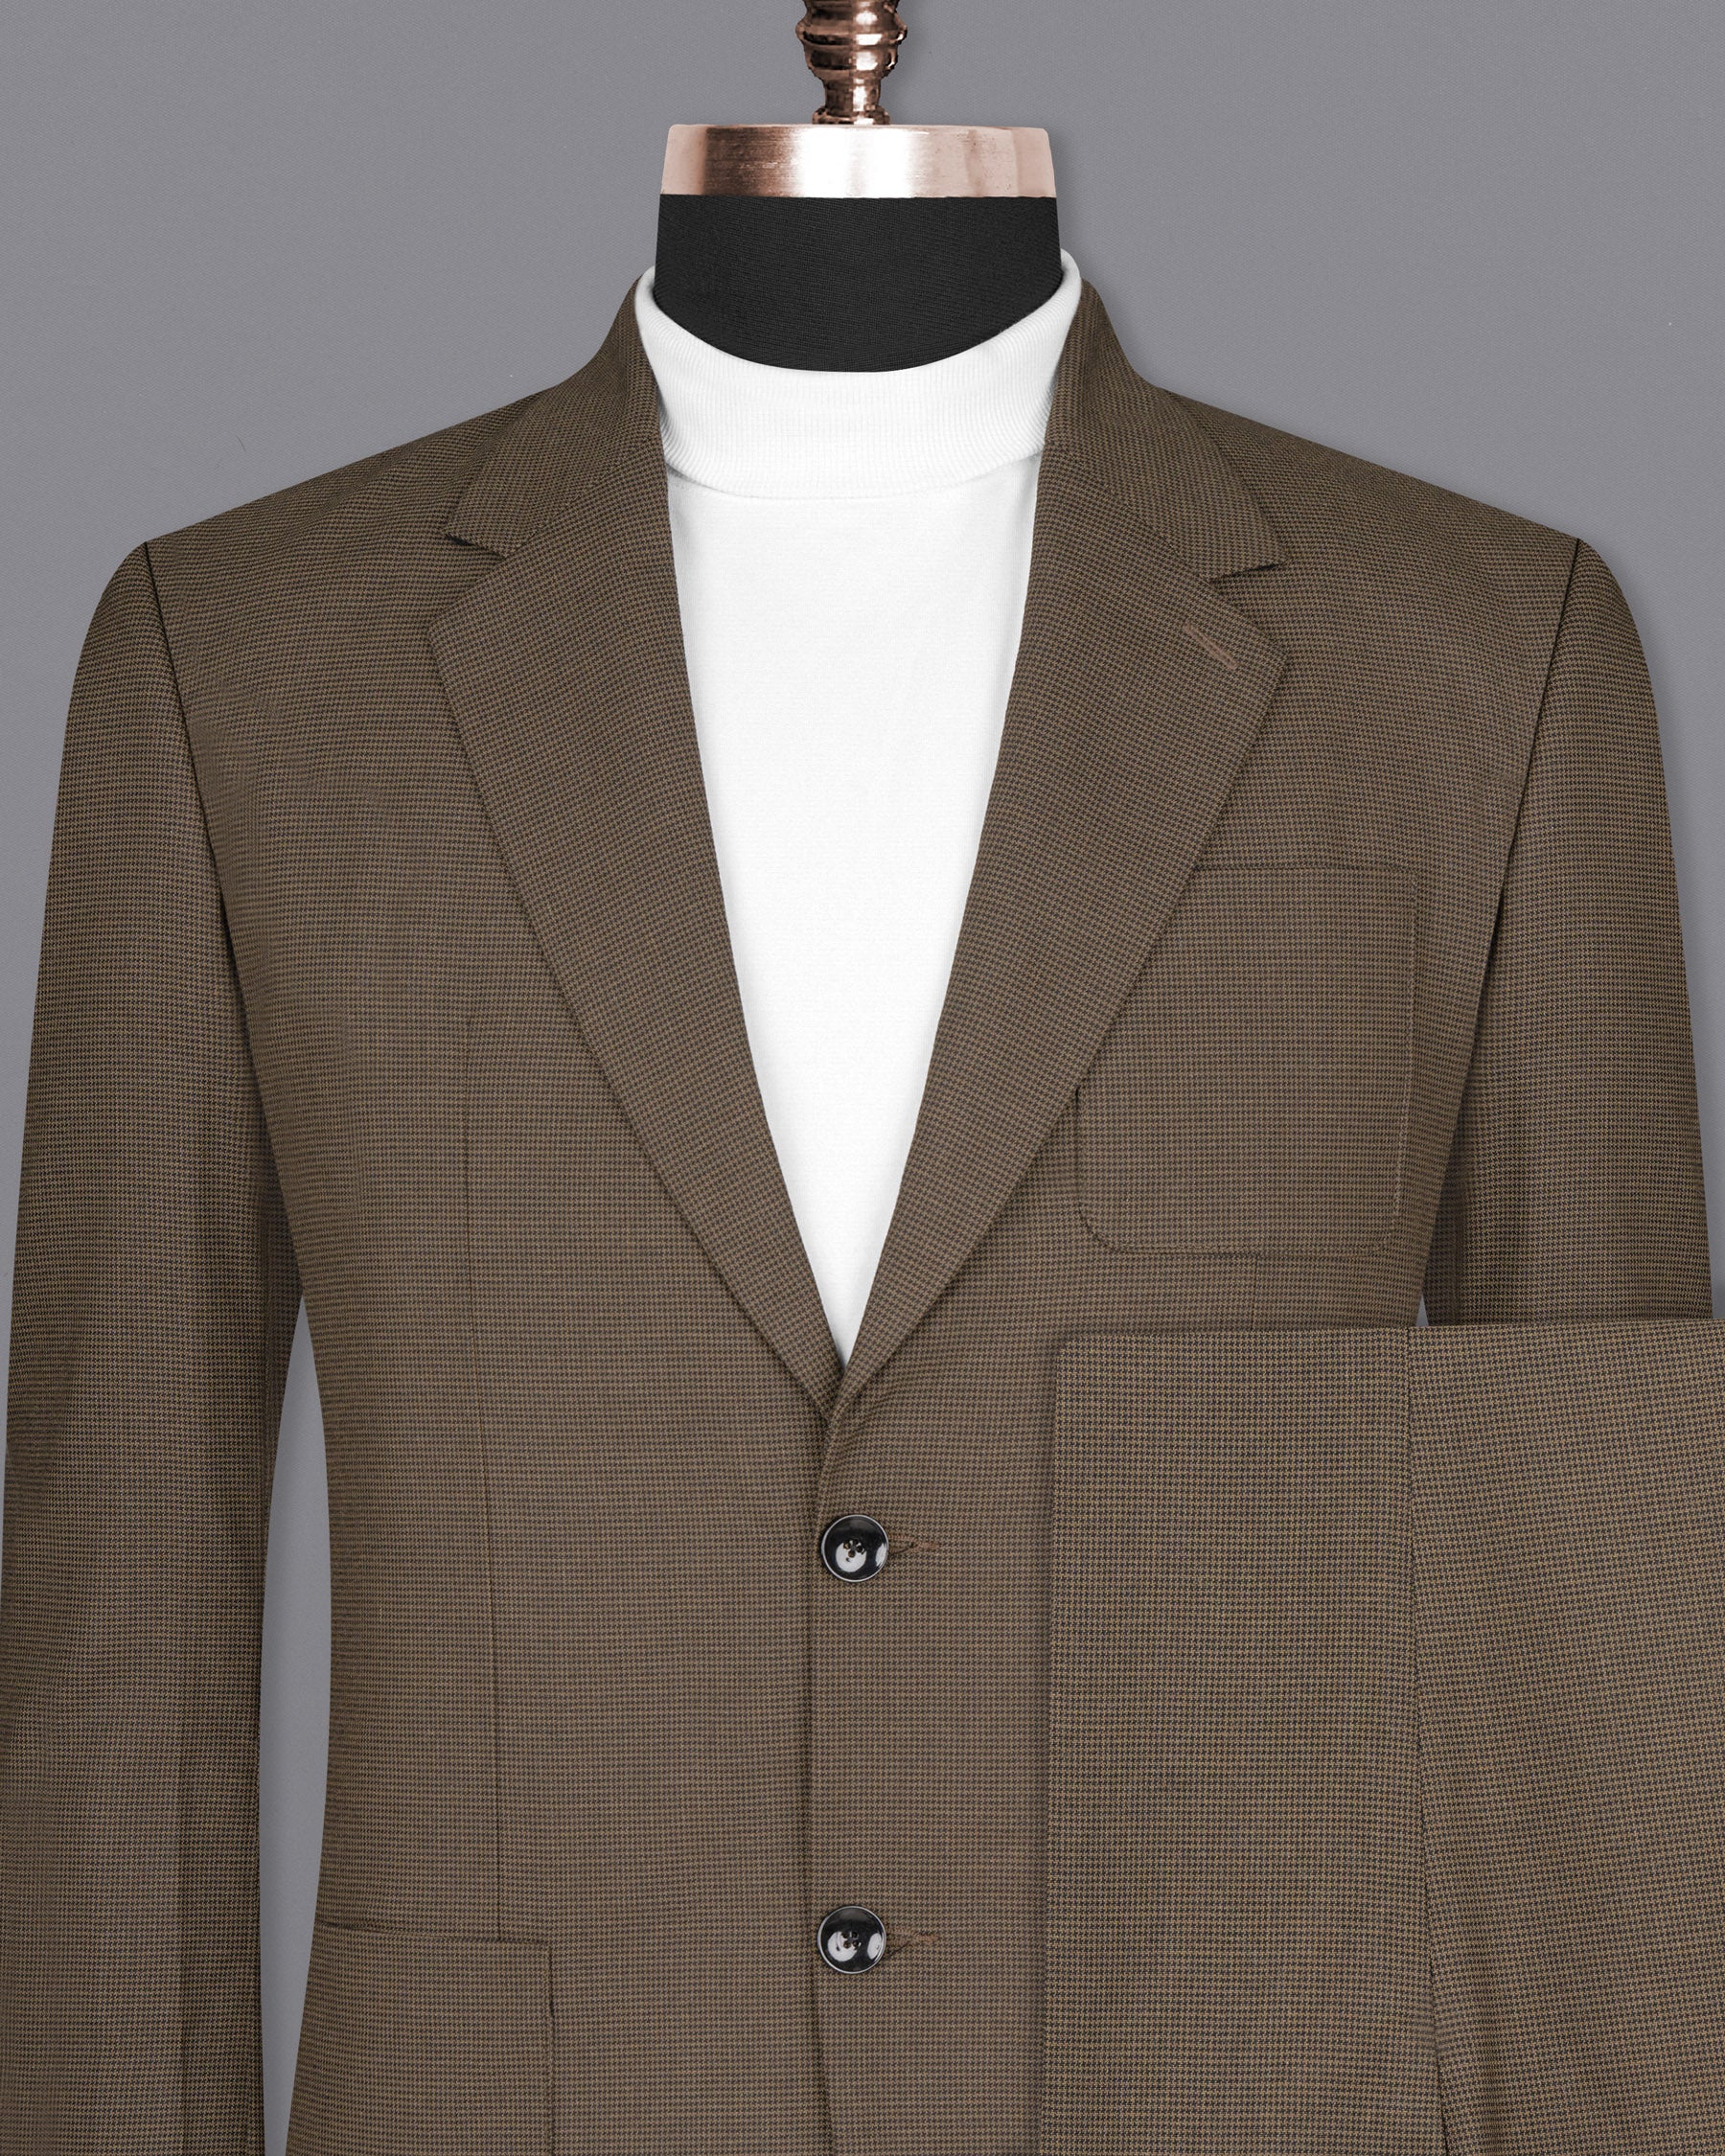 Coffee Brown Hounstooth Wool Rich Sports Suit ST1600-SB-PP-36, ST1600-SB-PP-38, ST1600-SB-PP-40, ST1600-SB-PP-42, ST1600-SB-PP-44, ST1600-SB-PP-46, ST1600-SB-PP-48, ST1600-SB-PP-50, ST1600-SB-PP-52, ST1600-SB-PP-54, ST1600-SB-PP-56, ST1600-SB-PP-58, ST1600-SB-PP-60